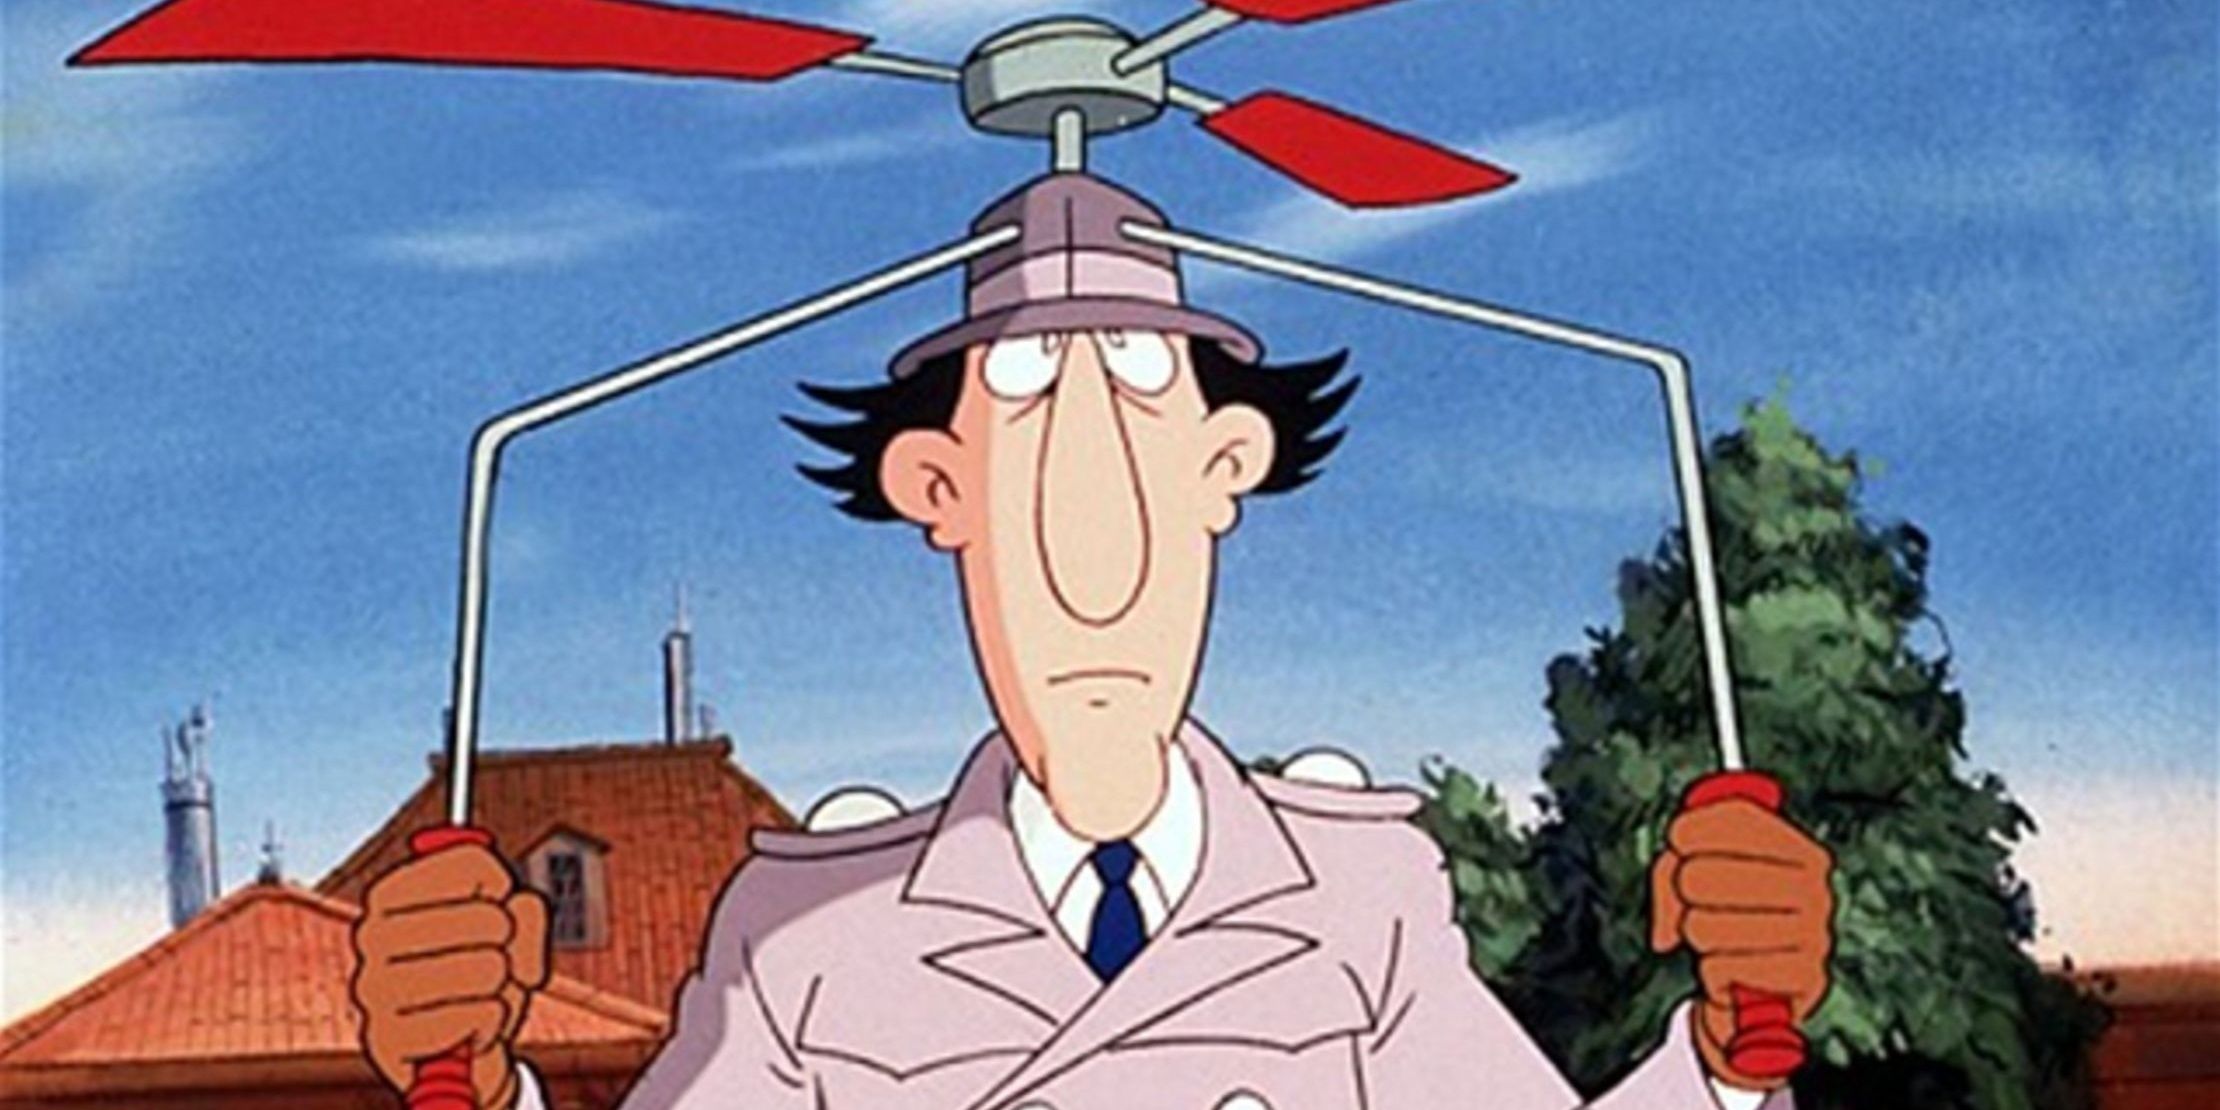 A picture of Inspector Gadget using his hat copter is shown.